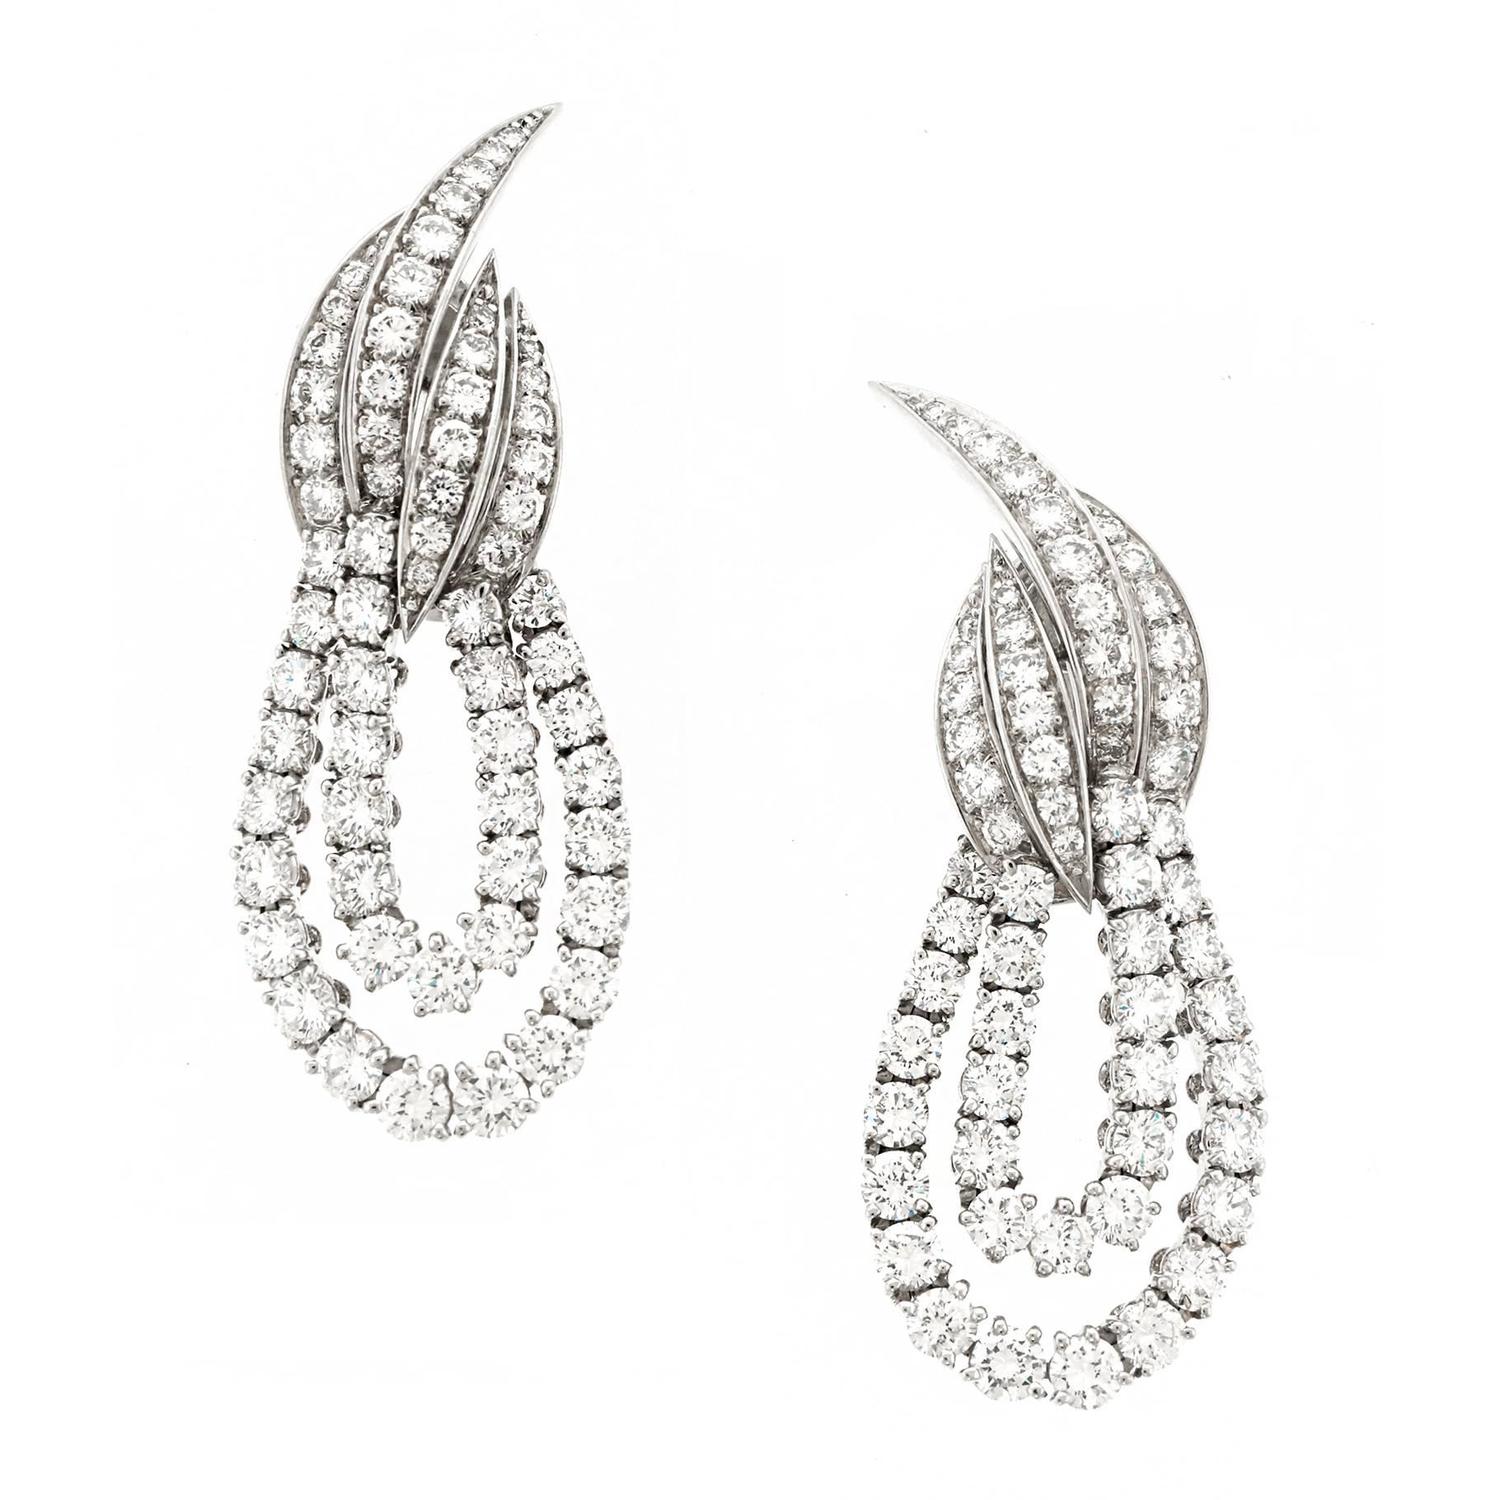 Spectacular Fred Paris Diamond-Set Platinum Earrings For Sale at 1stdibs